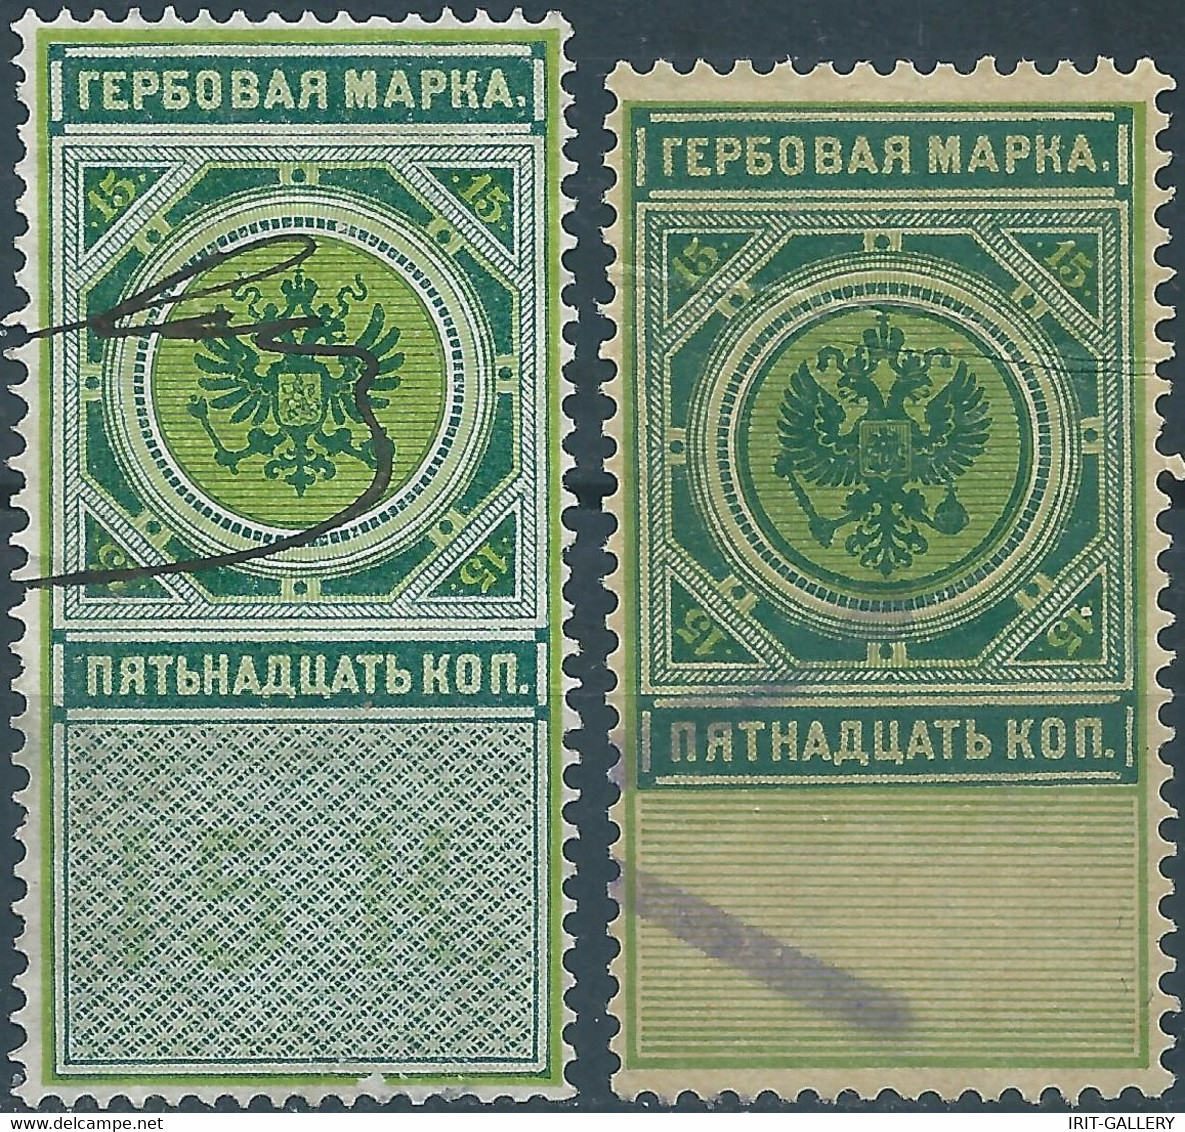 Russia - Russie - Russland,1886-1890 Revenue Stamps Fiscal Tax 15kop,1st And 2nd Issue, Different In Size And Color,used - Steuermarken